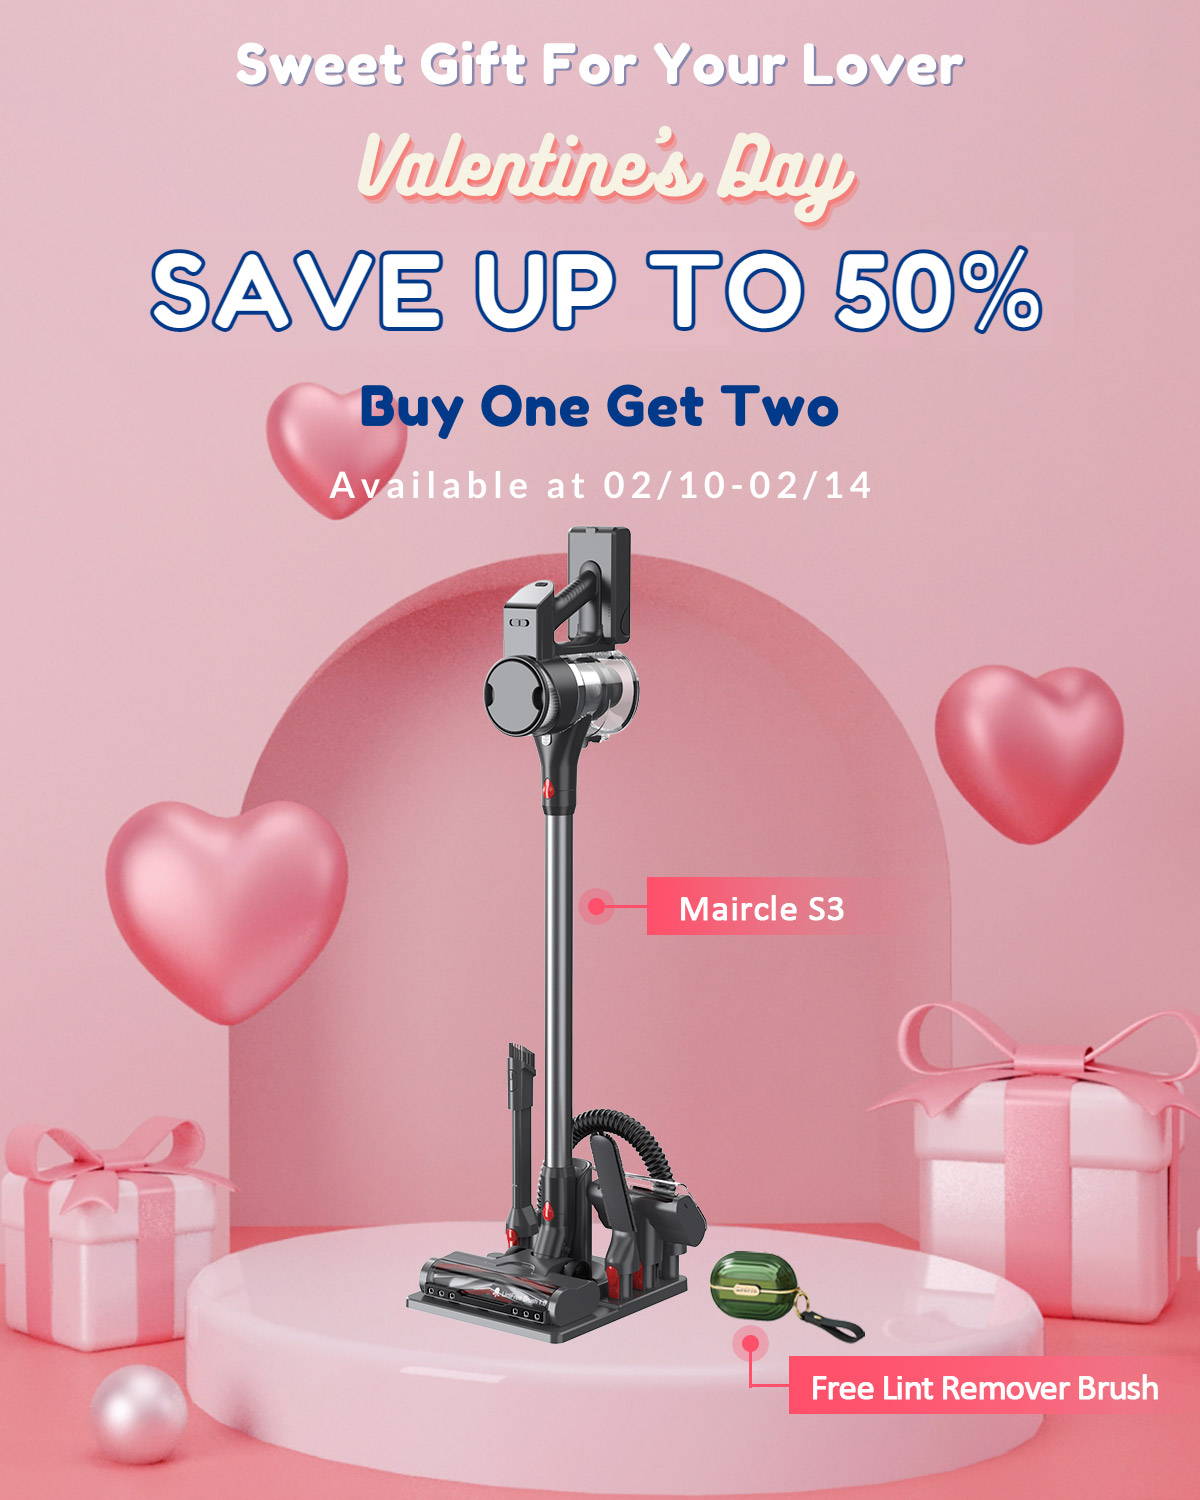 Maircle Valentine's Day Limited Promotion